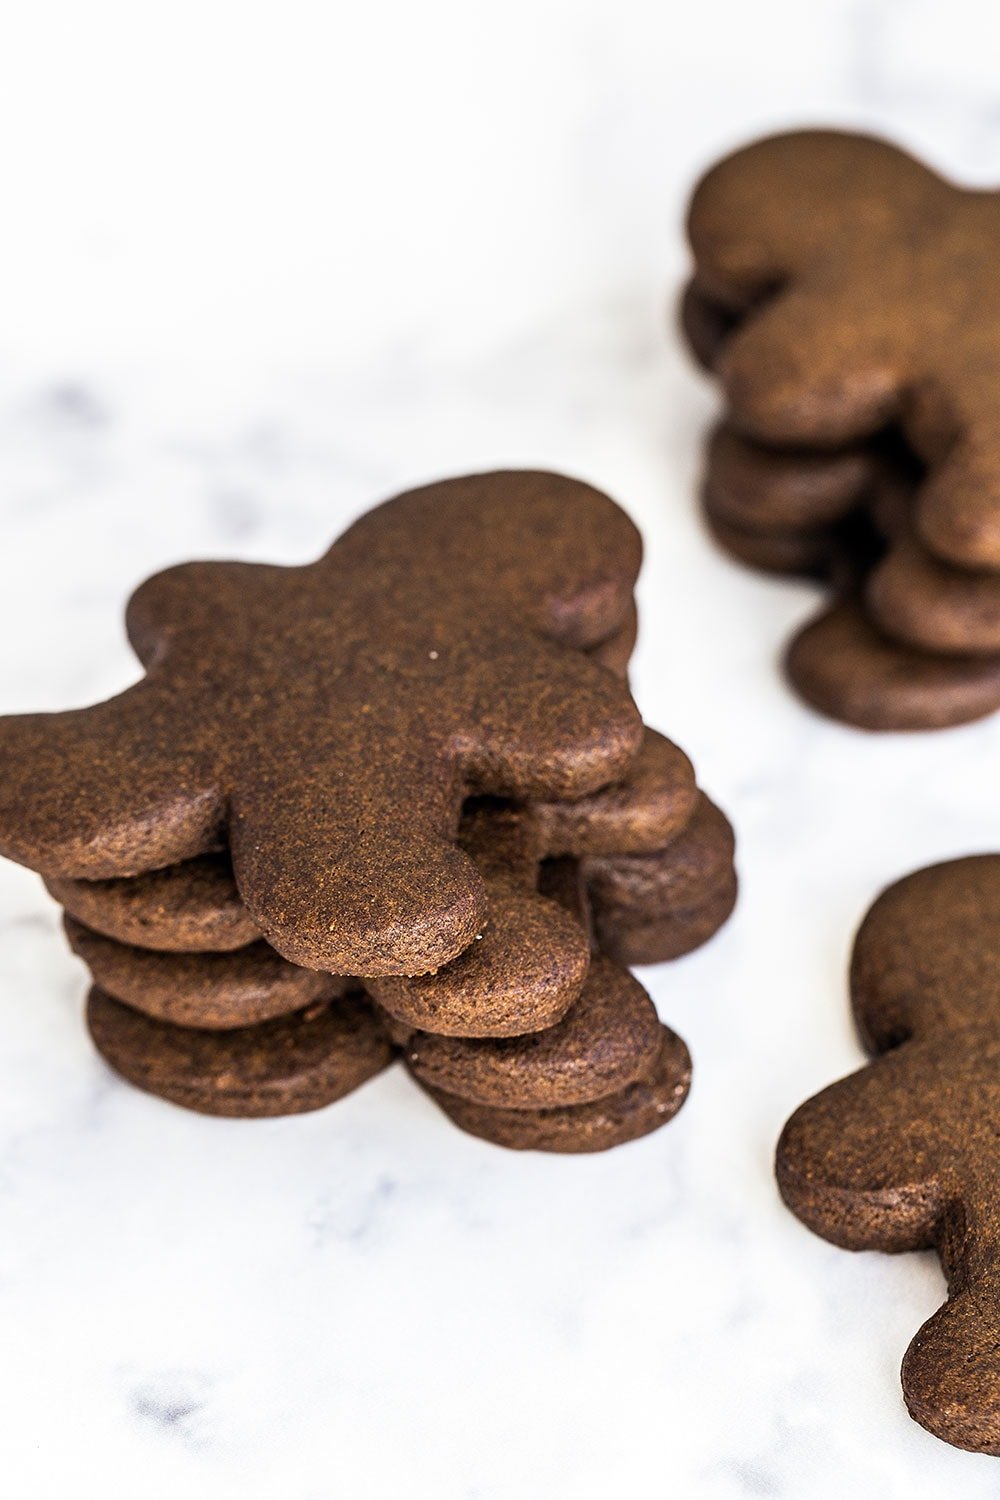 Easy Gingerbread Men Cookies are thick, soft, and perfectly maintain their adorable shape. This dough is a dream to work with and the cookies can be made ahead of time! Easy cookie icing included.